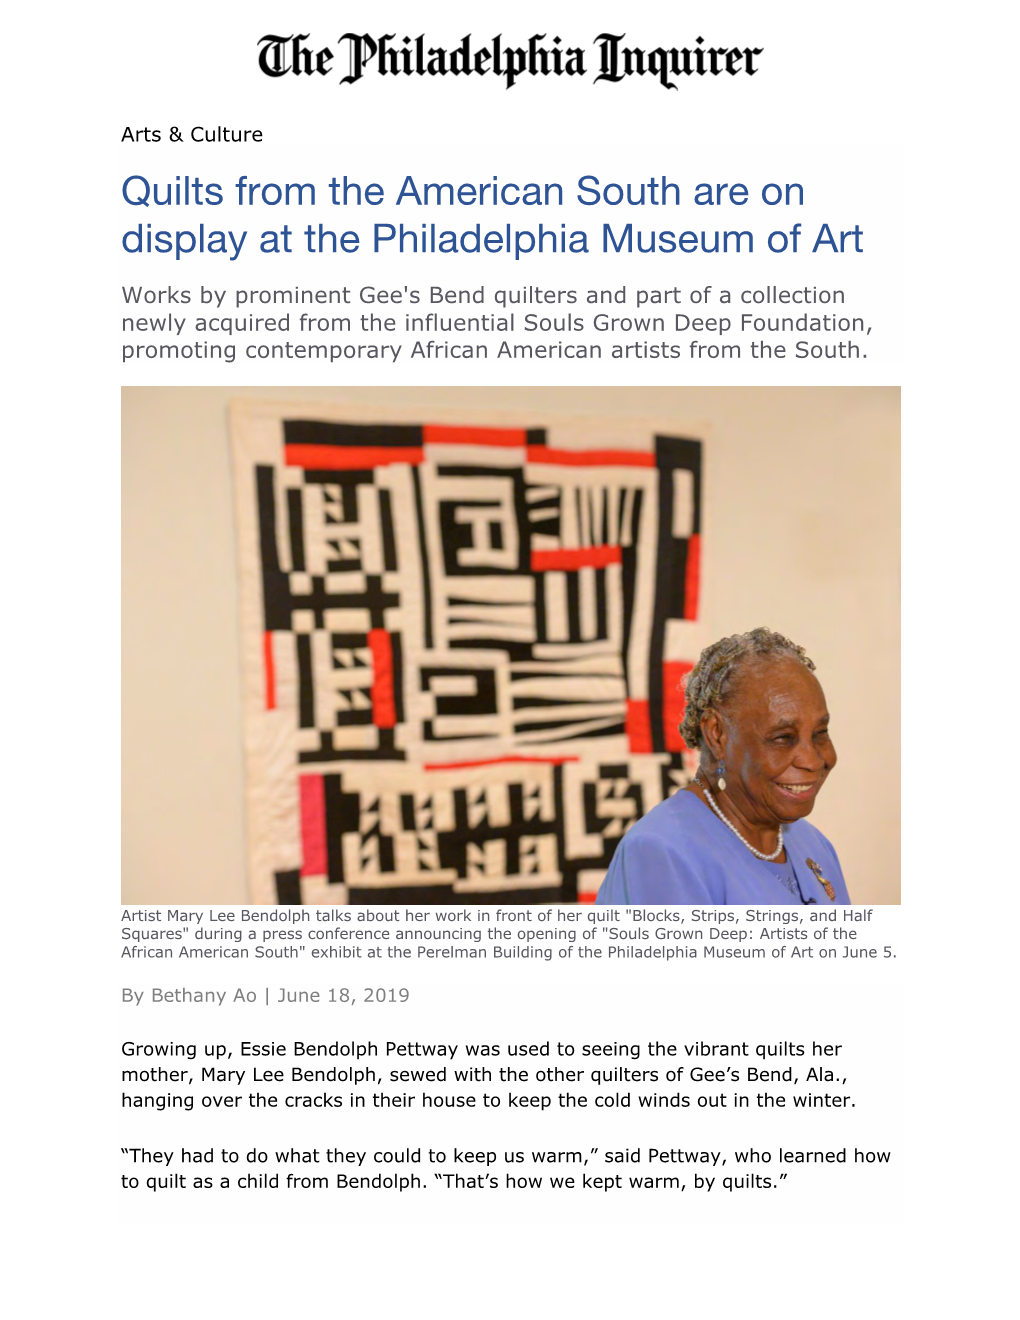 Quilts from the American South Are on Display at the Philadelphia Museum of Art